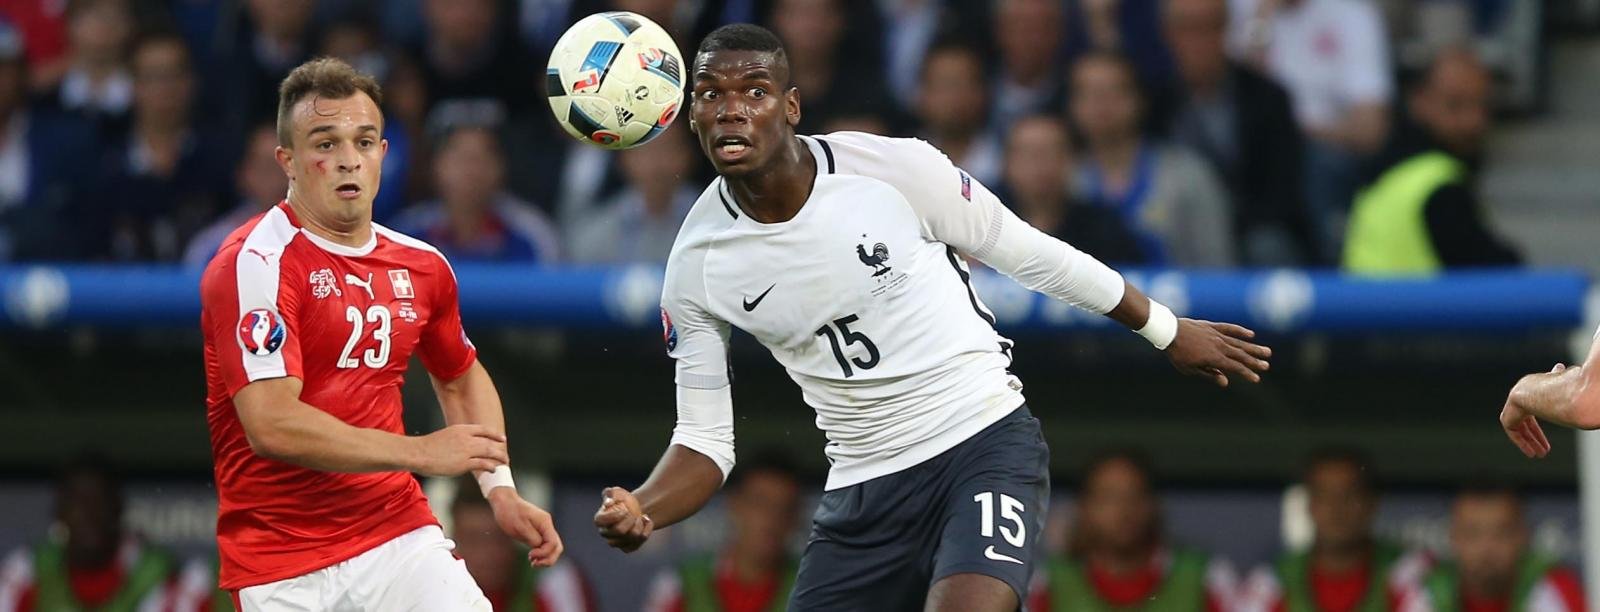 Switzerland 0-0 France: EURO 2016 Group A Report